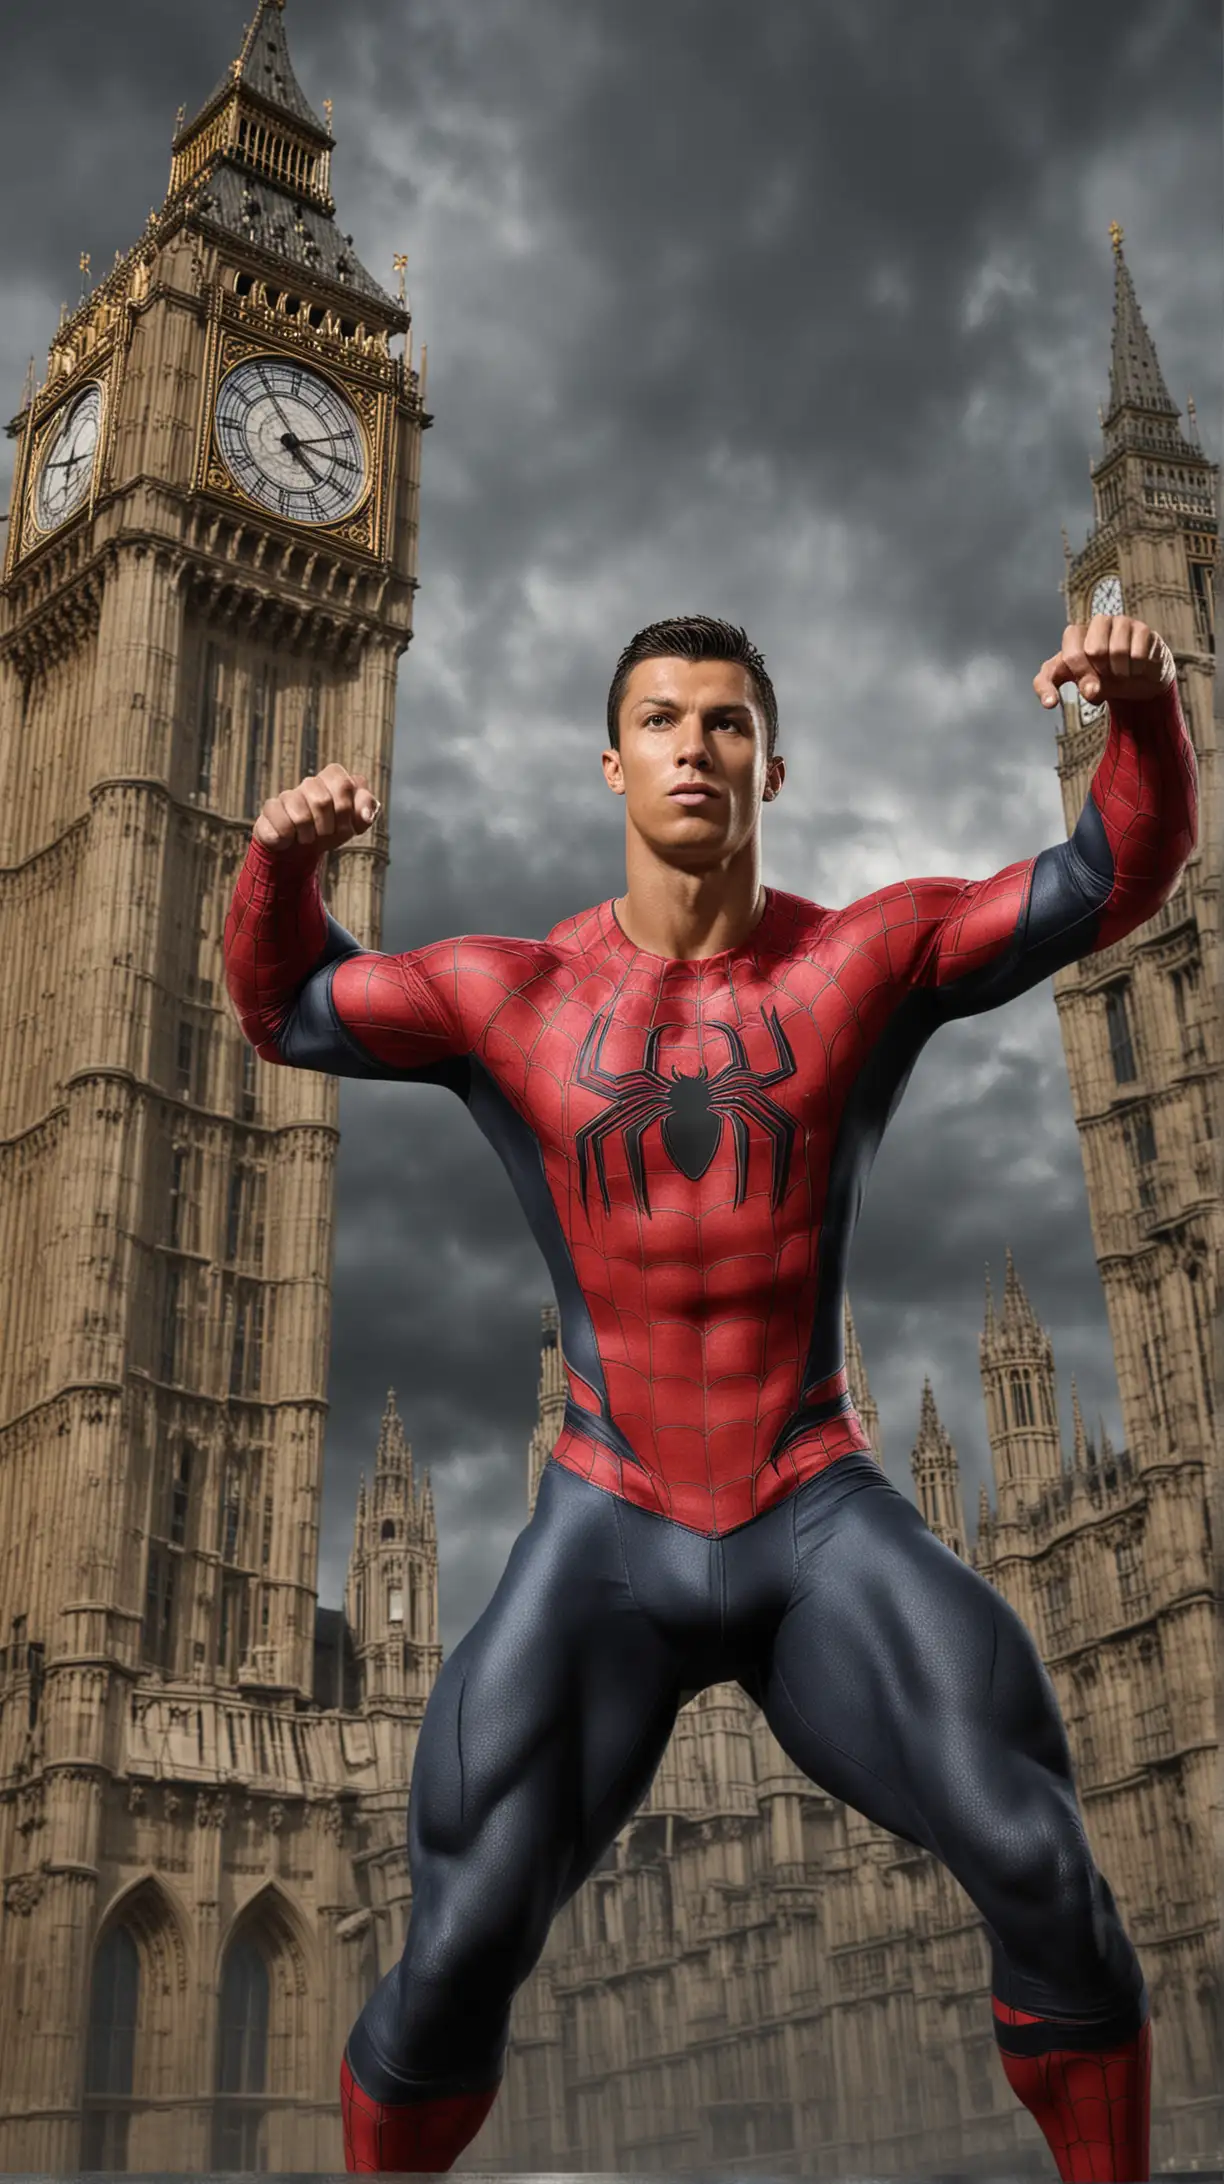 Cristiano Ronaldo as Spiderman with Muscular Physique against Big Ben Background